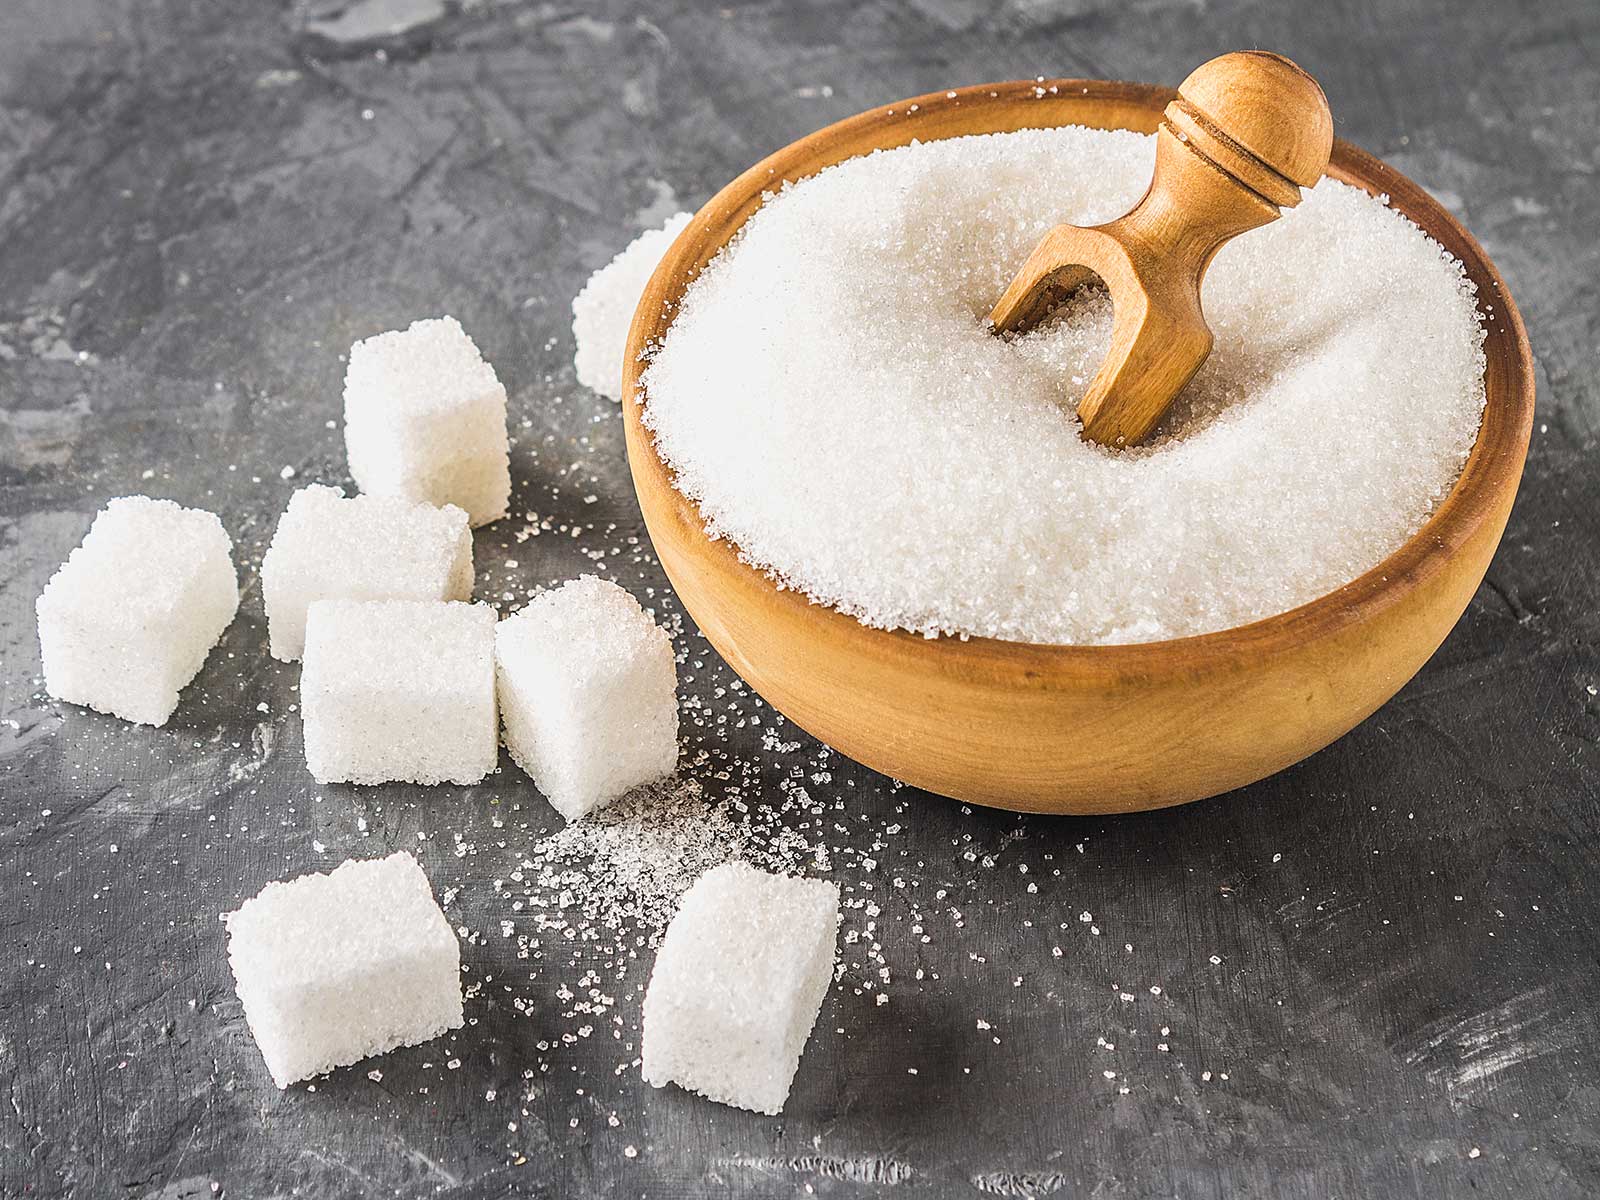 What happens to teeth when you eat too much sugar?